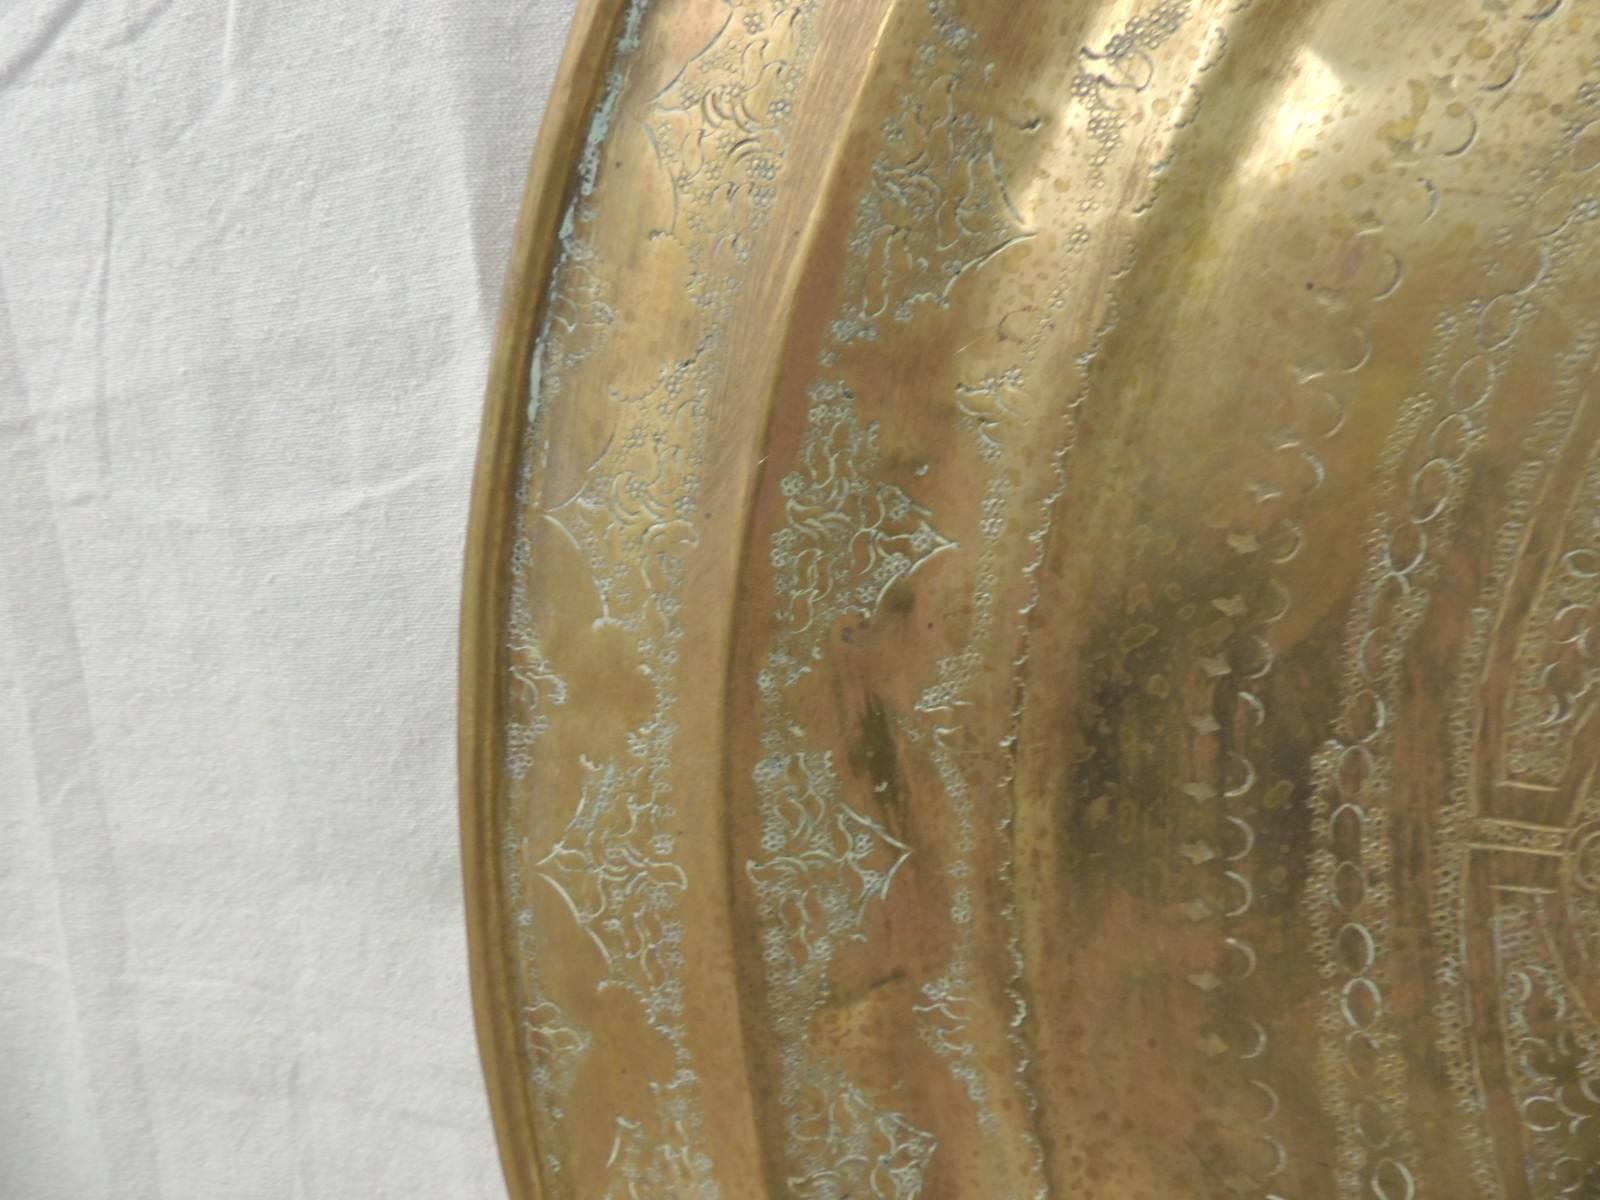 Large brass Persian round vintage tray.
Large brass Persian round vintage tray with hand-forged edges and star in the center. Hammering details includes flowers and trees all around the center star. Excellent patina due to aging. No hanging hook in